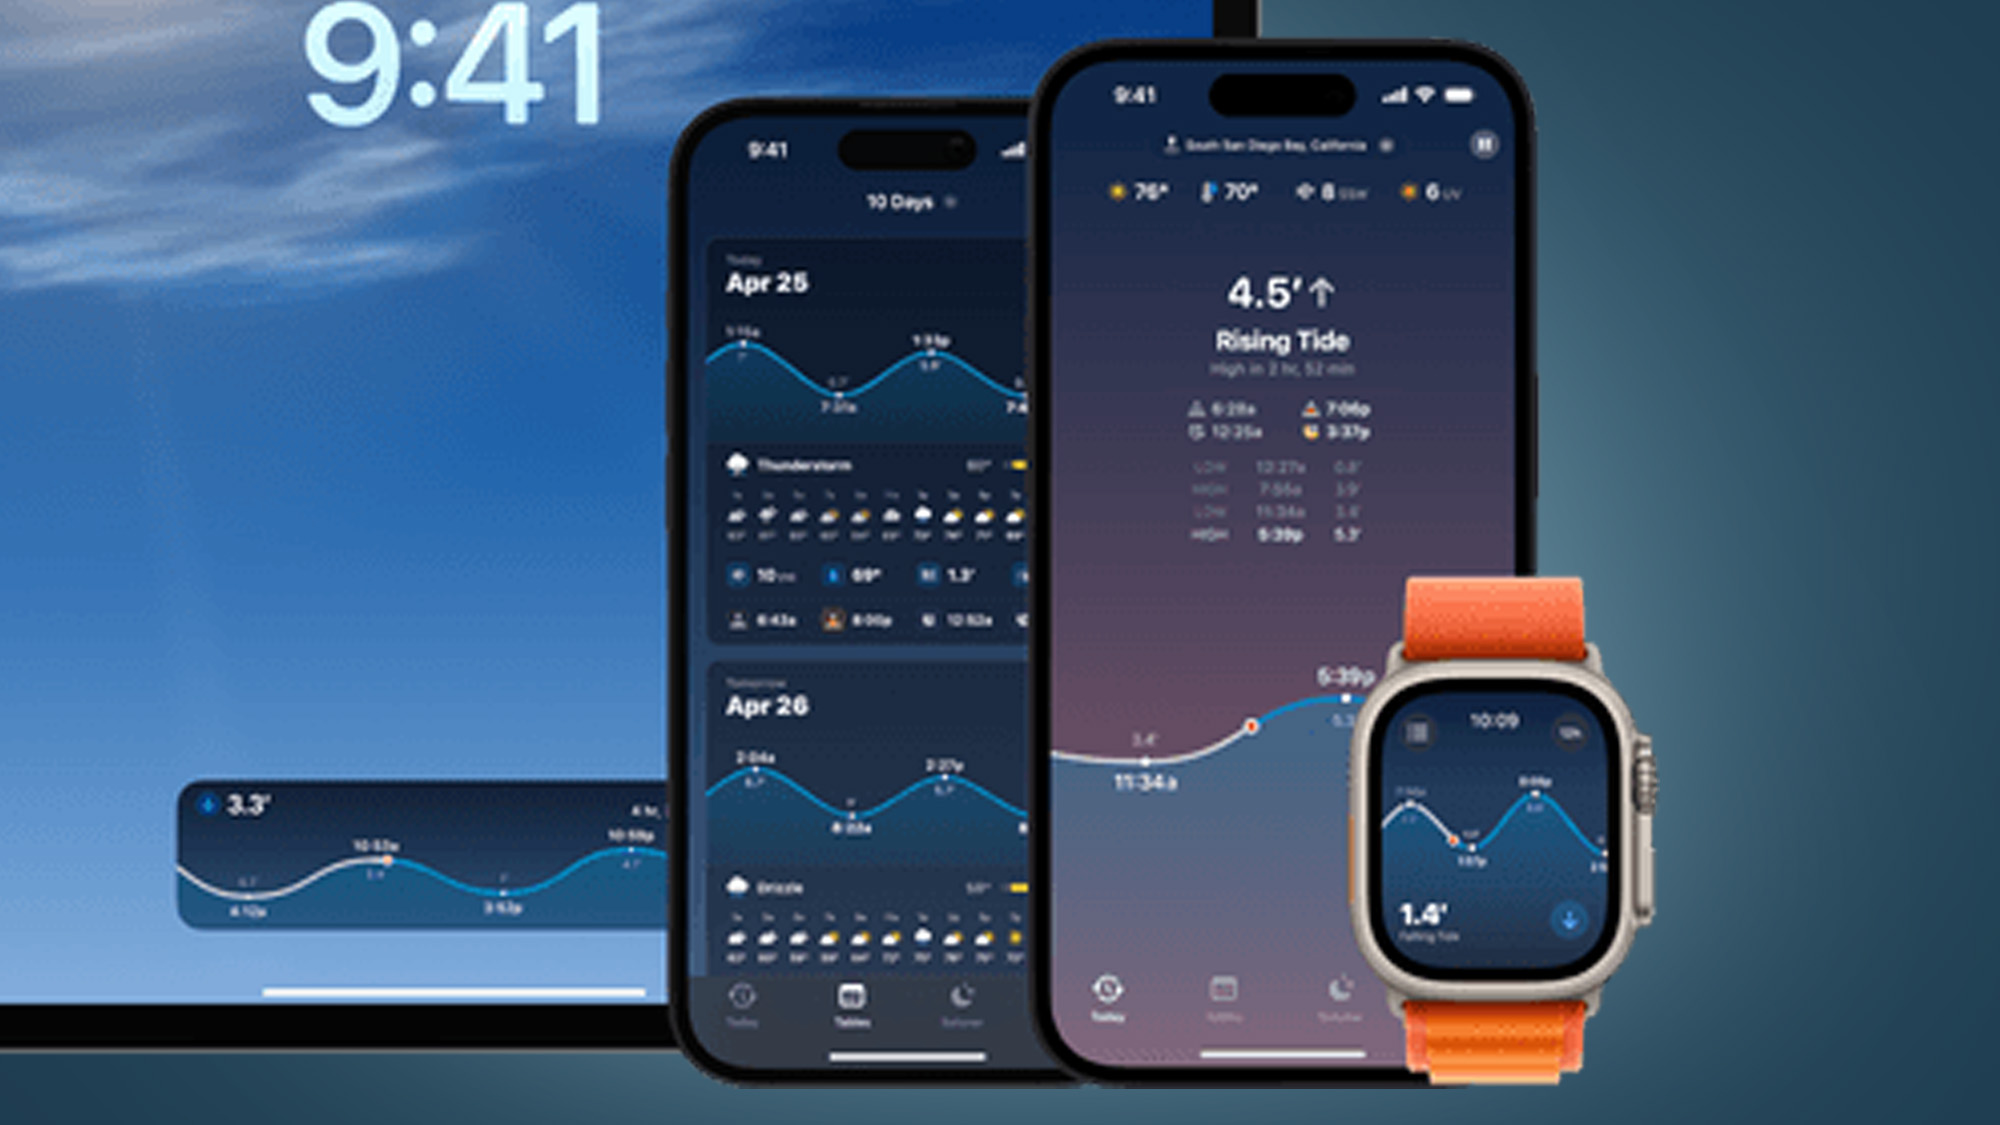 Apple Watch and phone on a blue background showing the Tide Guide app